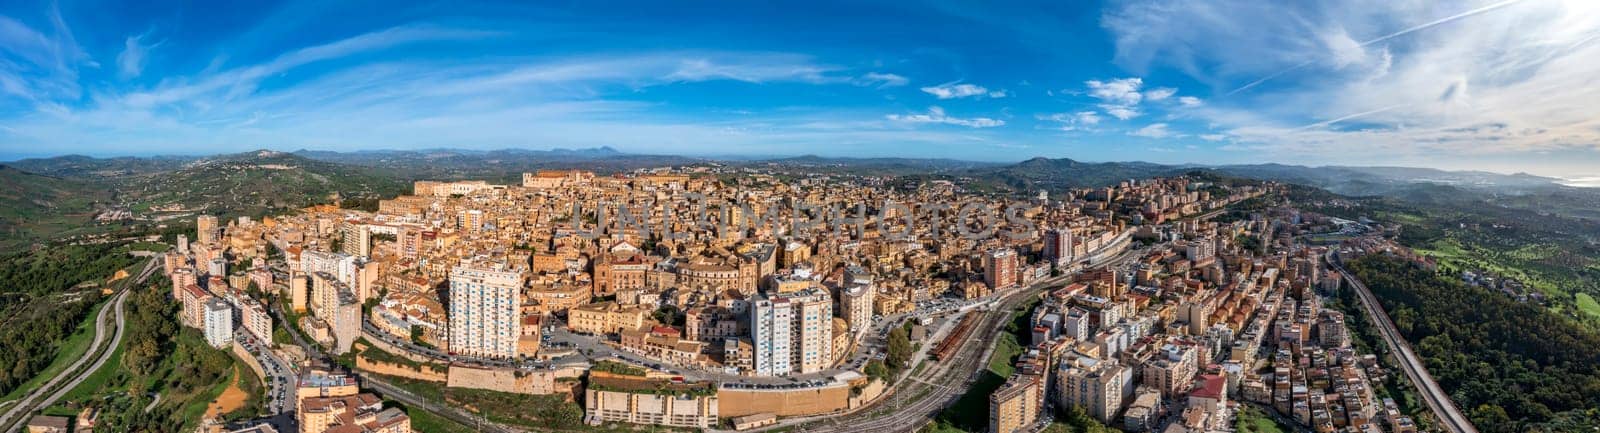 Stunning aerial panorama to a city named Agrigento located in Sicily, Italy